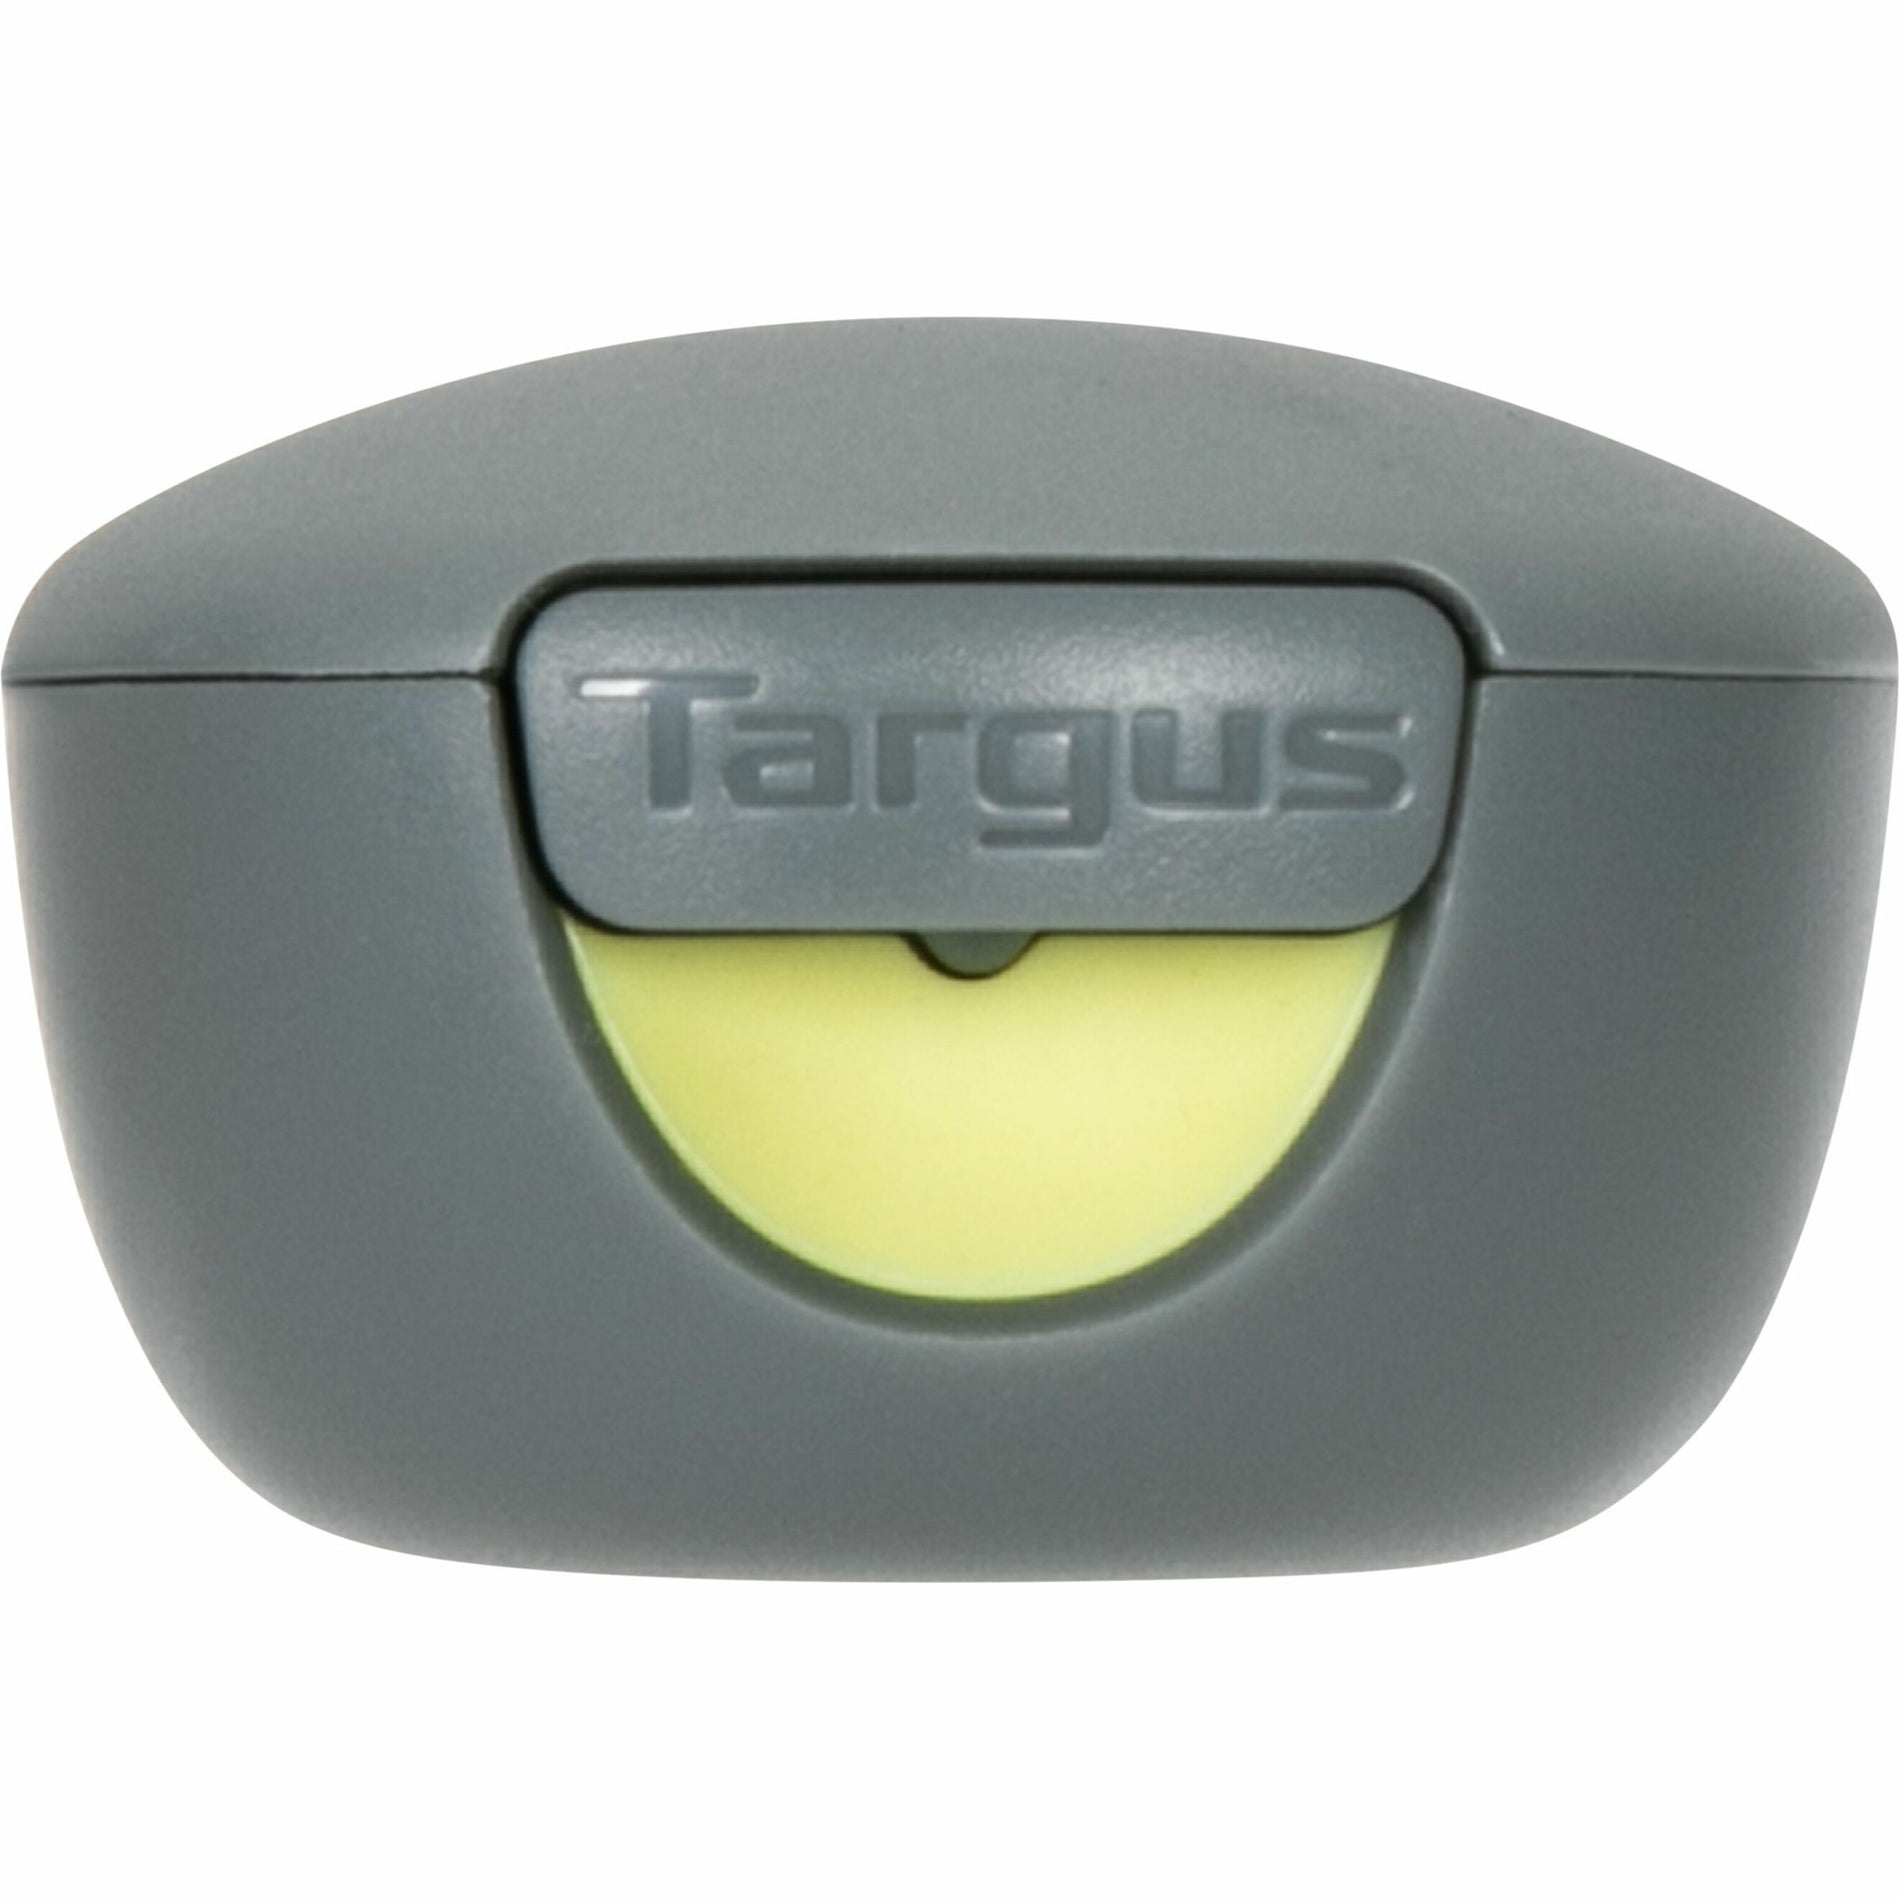 Targus AMP06704AMGL Control Plus Dual Mode Antimicrobial Presenter with Laser, Wireless USB Bluetooth, 2.4 GHz